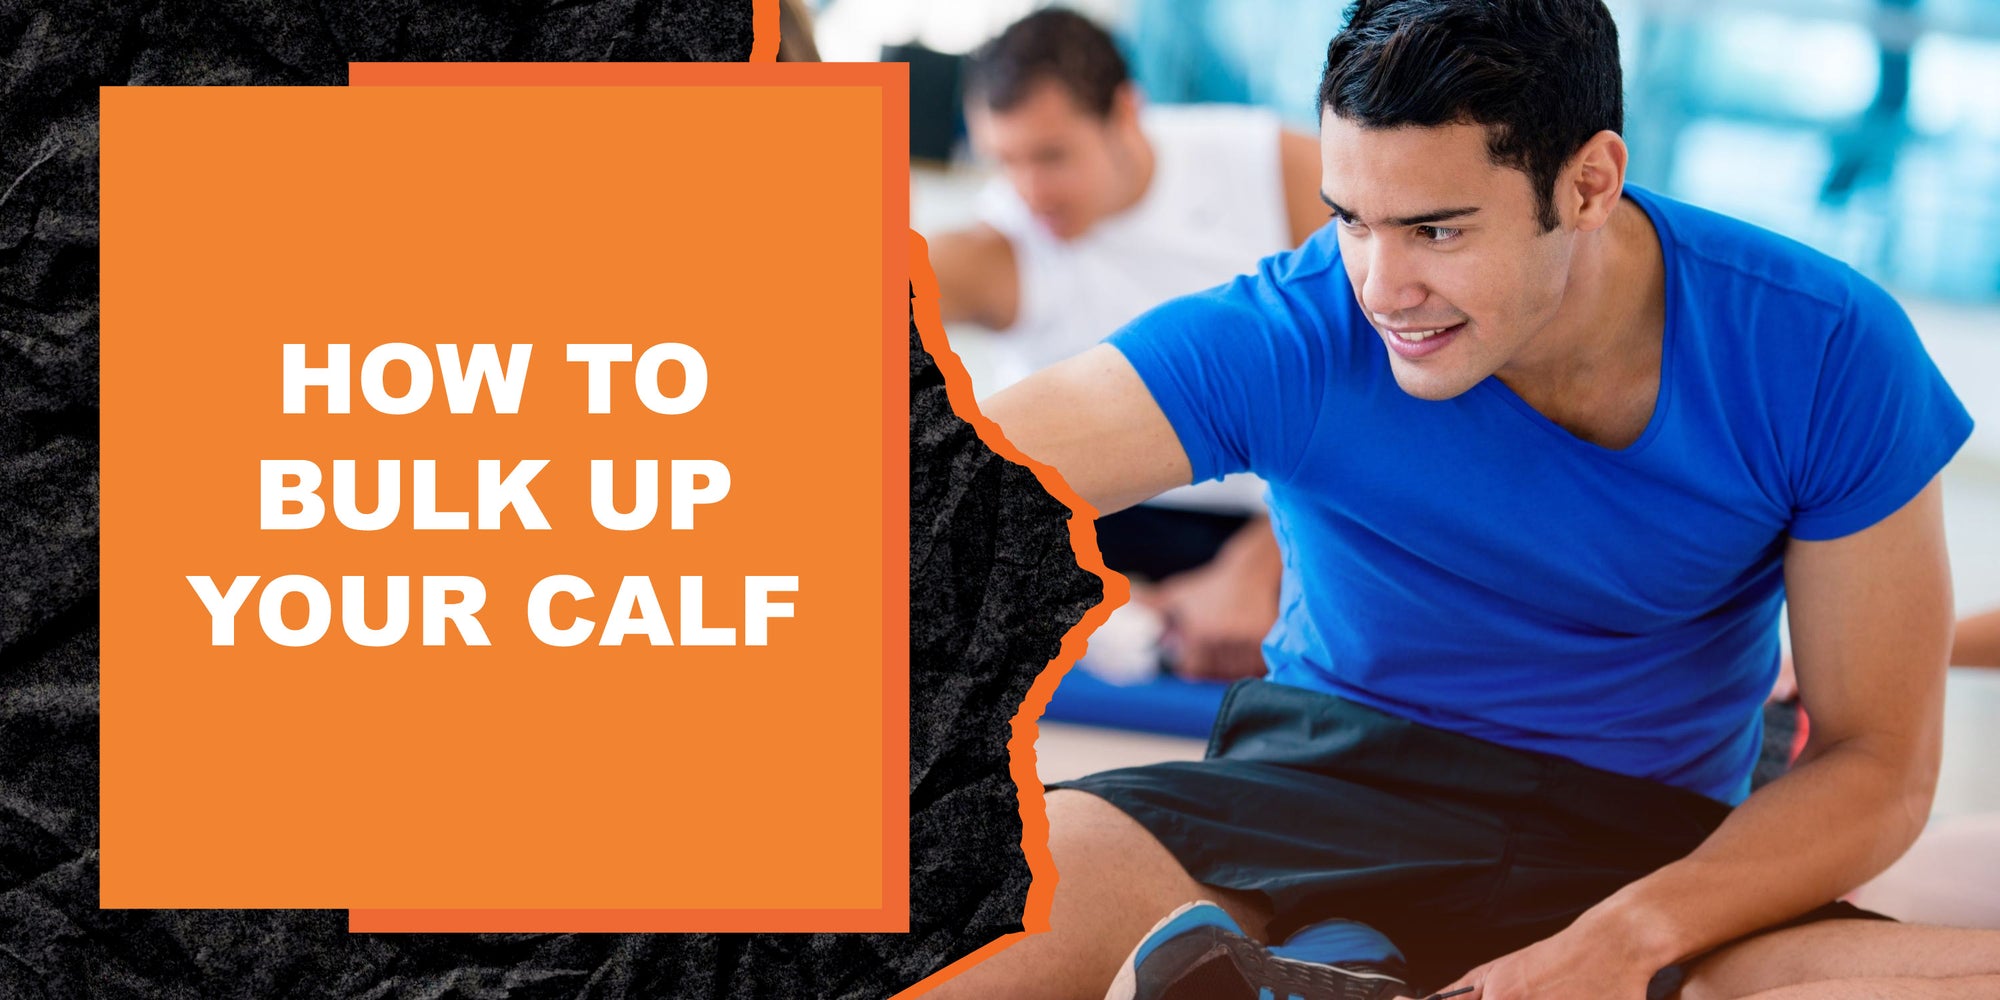 How to Bulk Up Your Calf